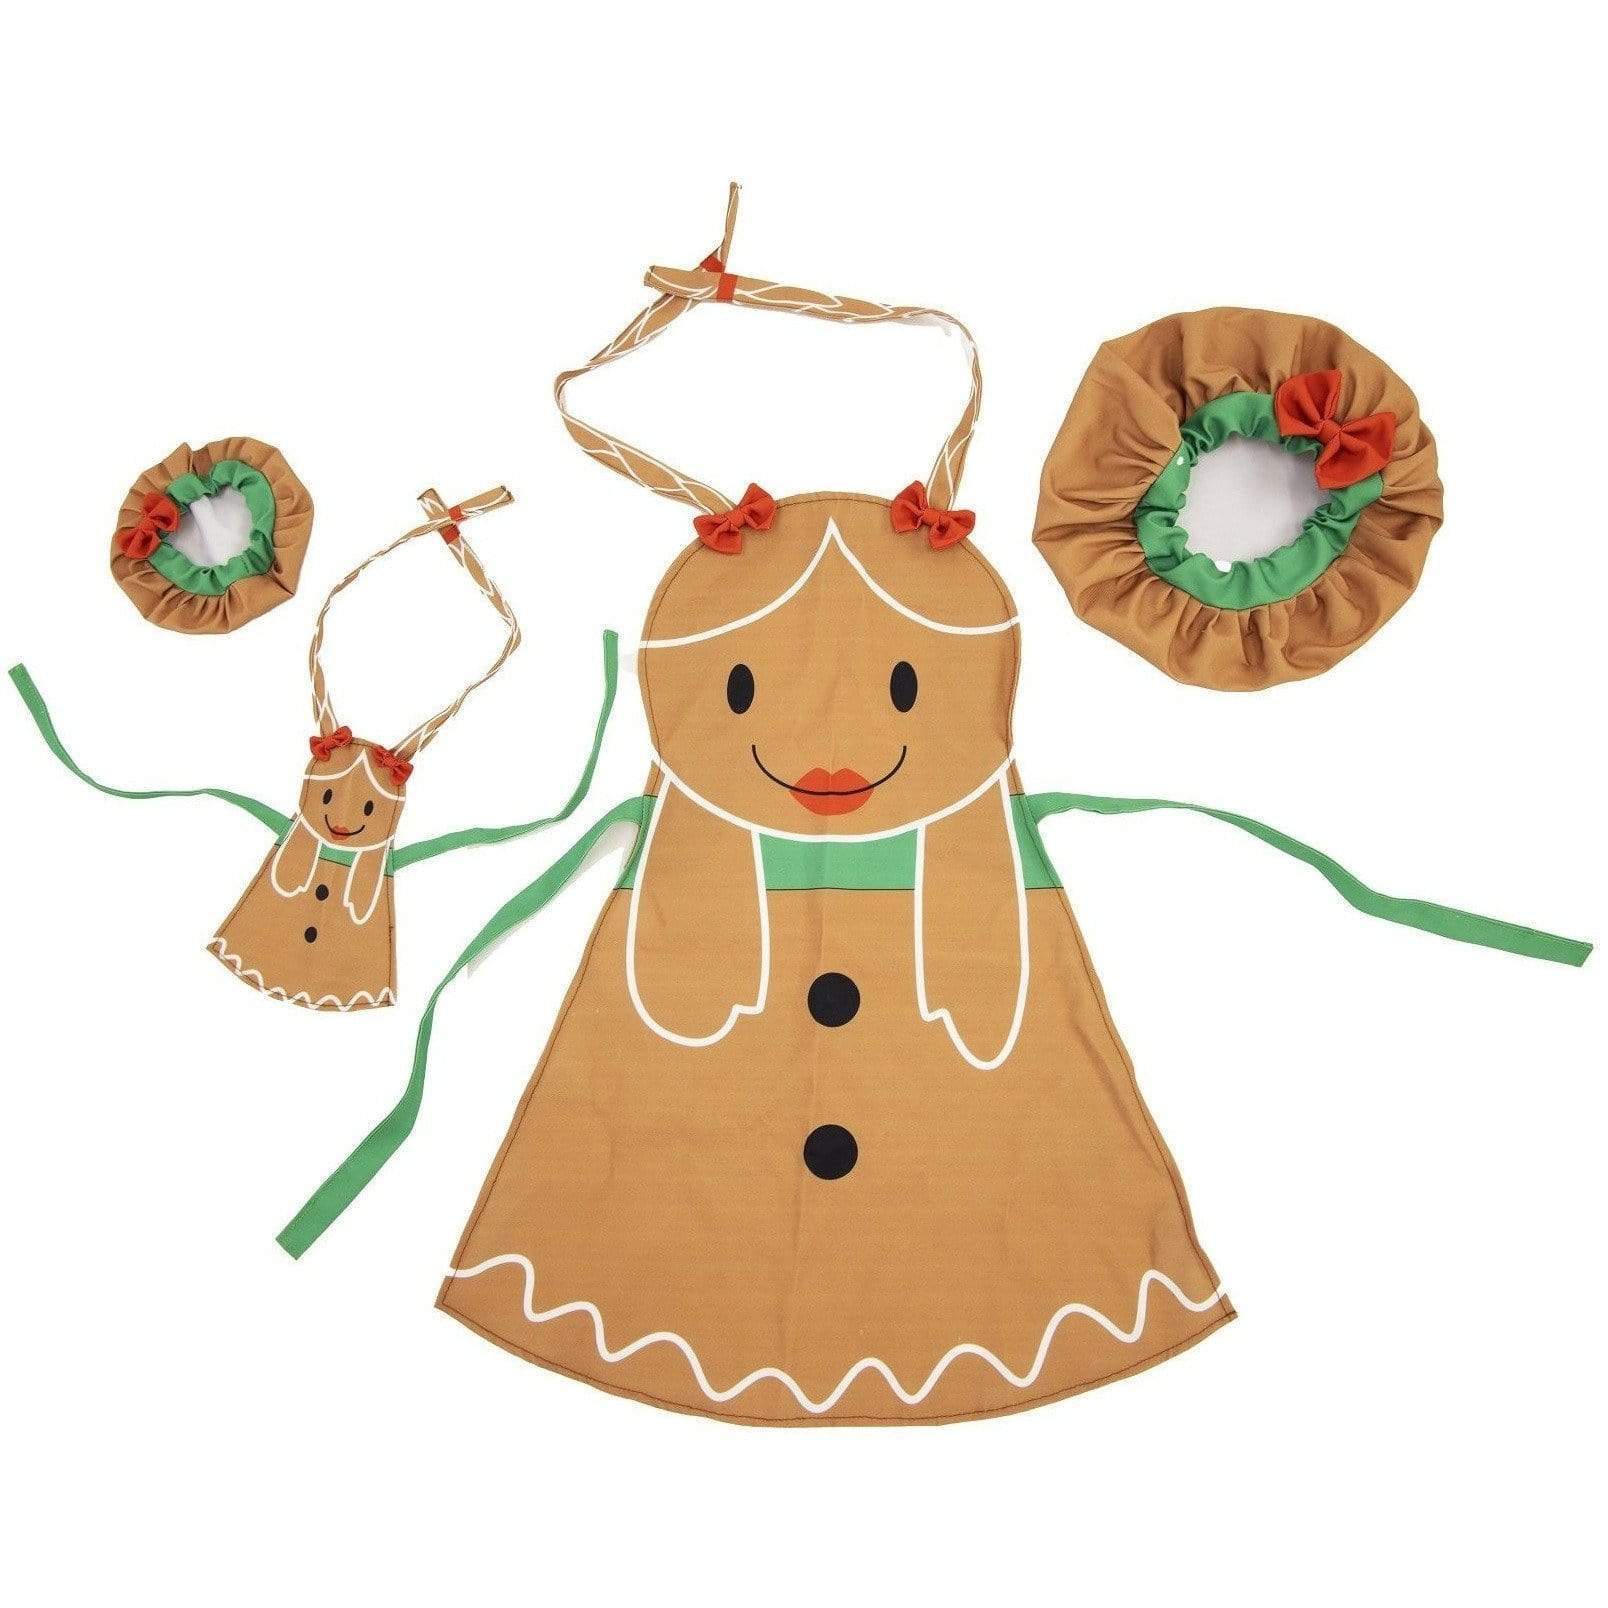 Playtime By Eimmie Matching Girls' & Doll Holiday Gingerbread Outfit Set $8.75 + Free Shipping